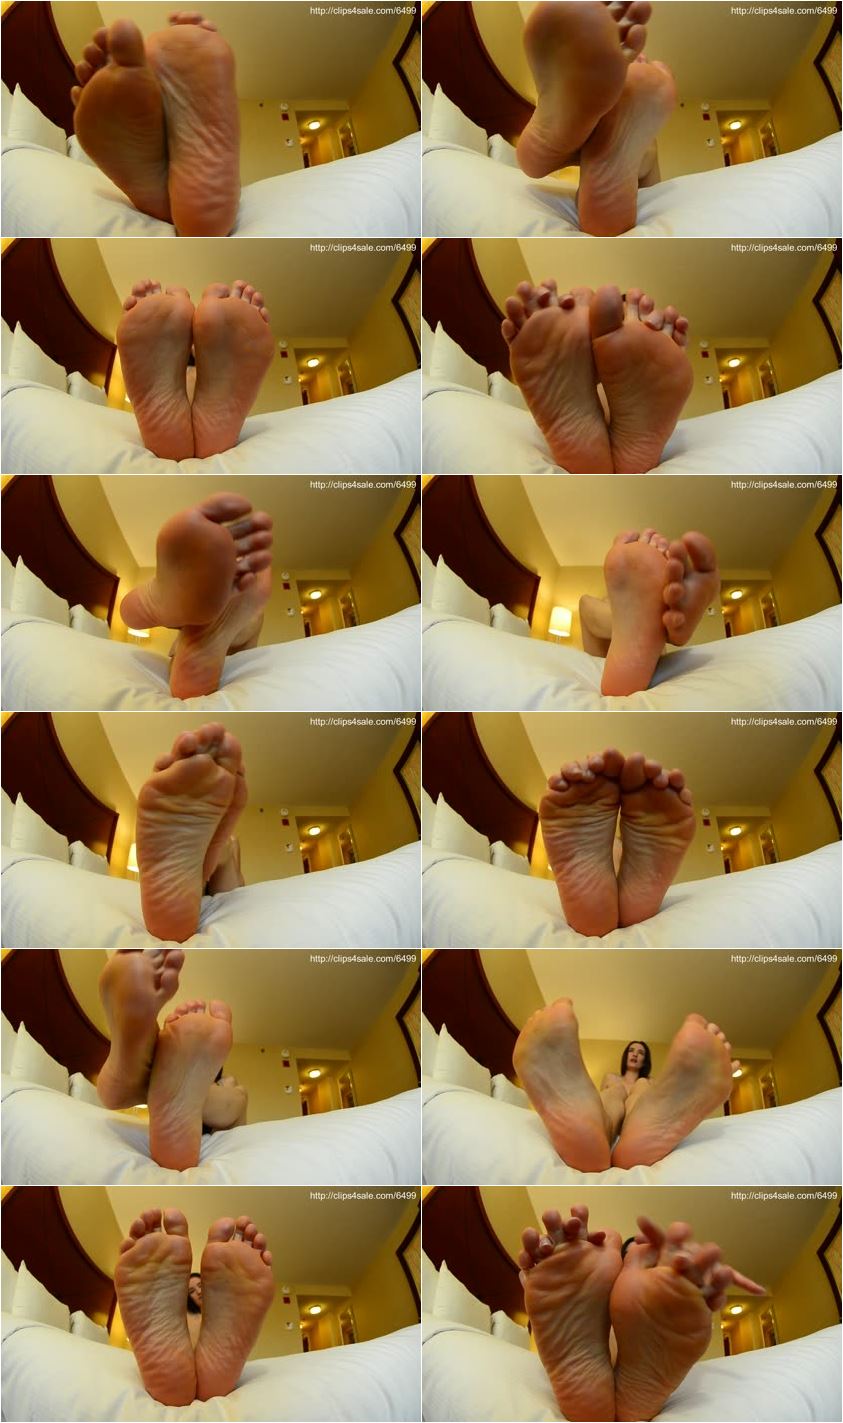 Fiery Dom rubs her soles! - MPG - Amateur soles giantess and footjobs